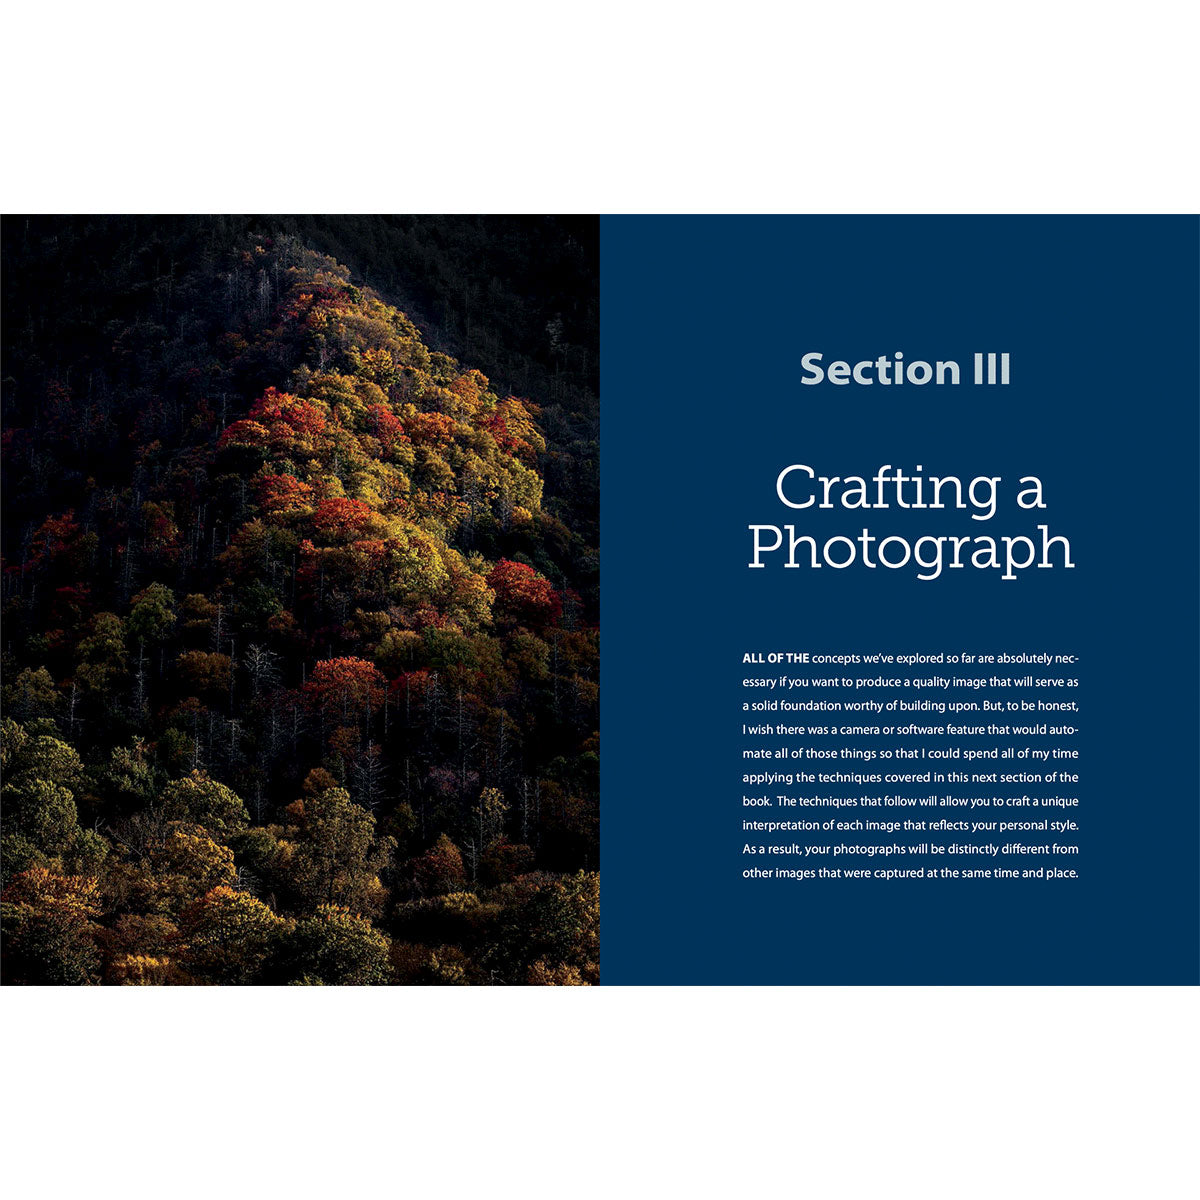 Crafting the Landscape Photograph with Lightroom and Photoshop Book